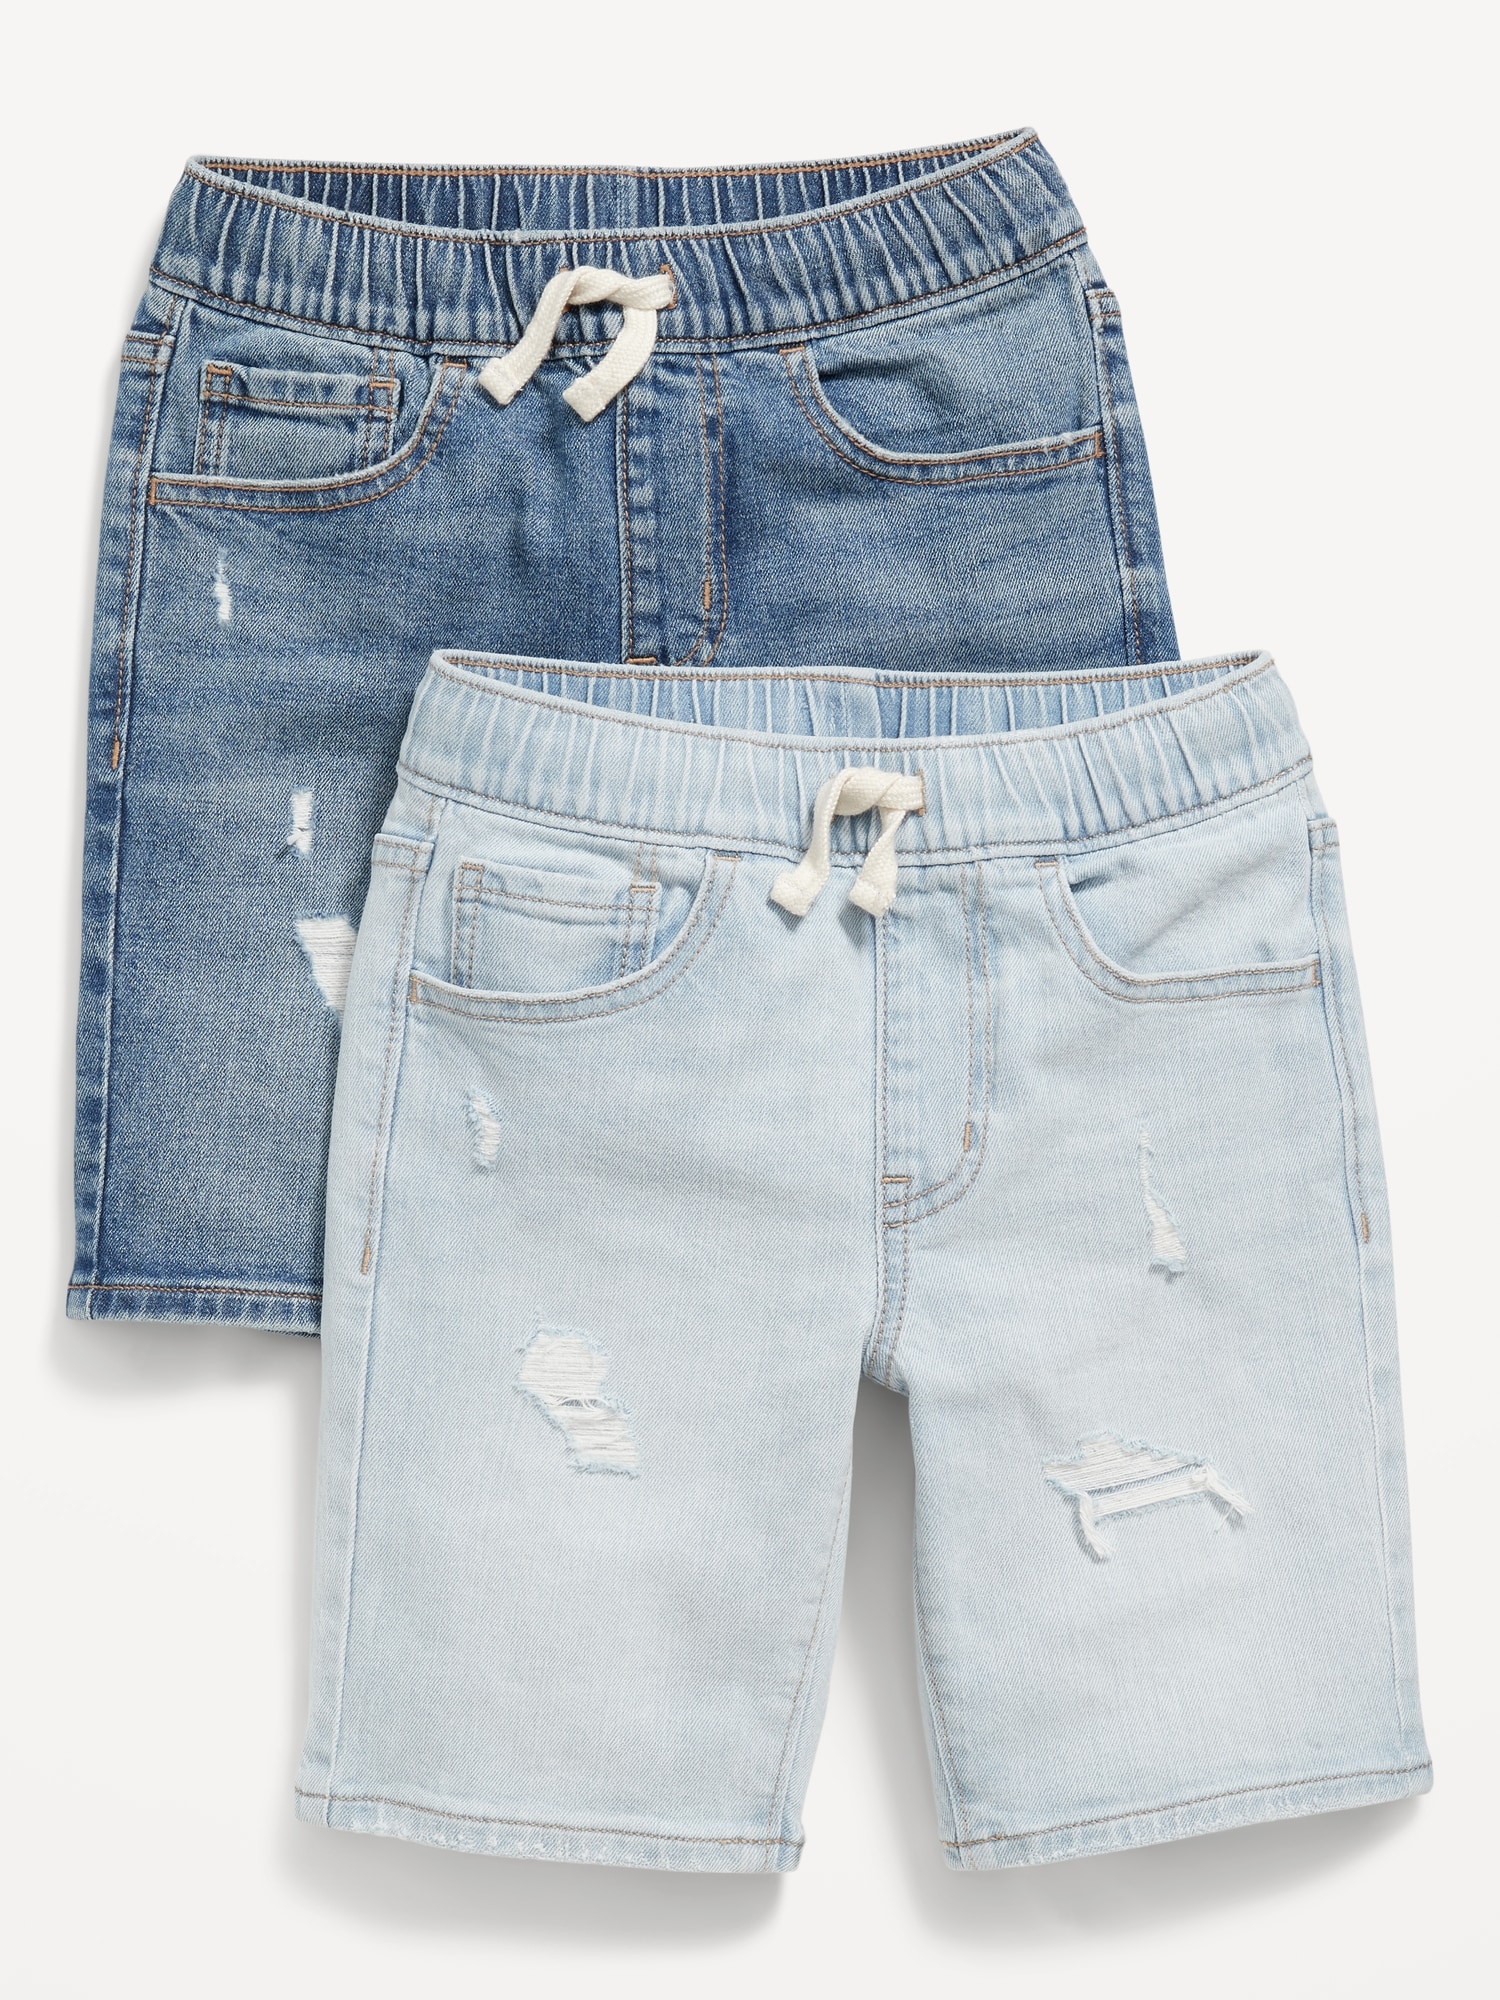 Knee Length 360 Stretch Pull-On Jean Shorts 2-Pack for Boys